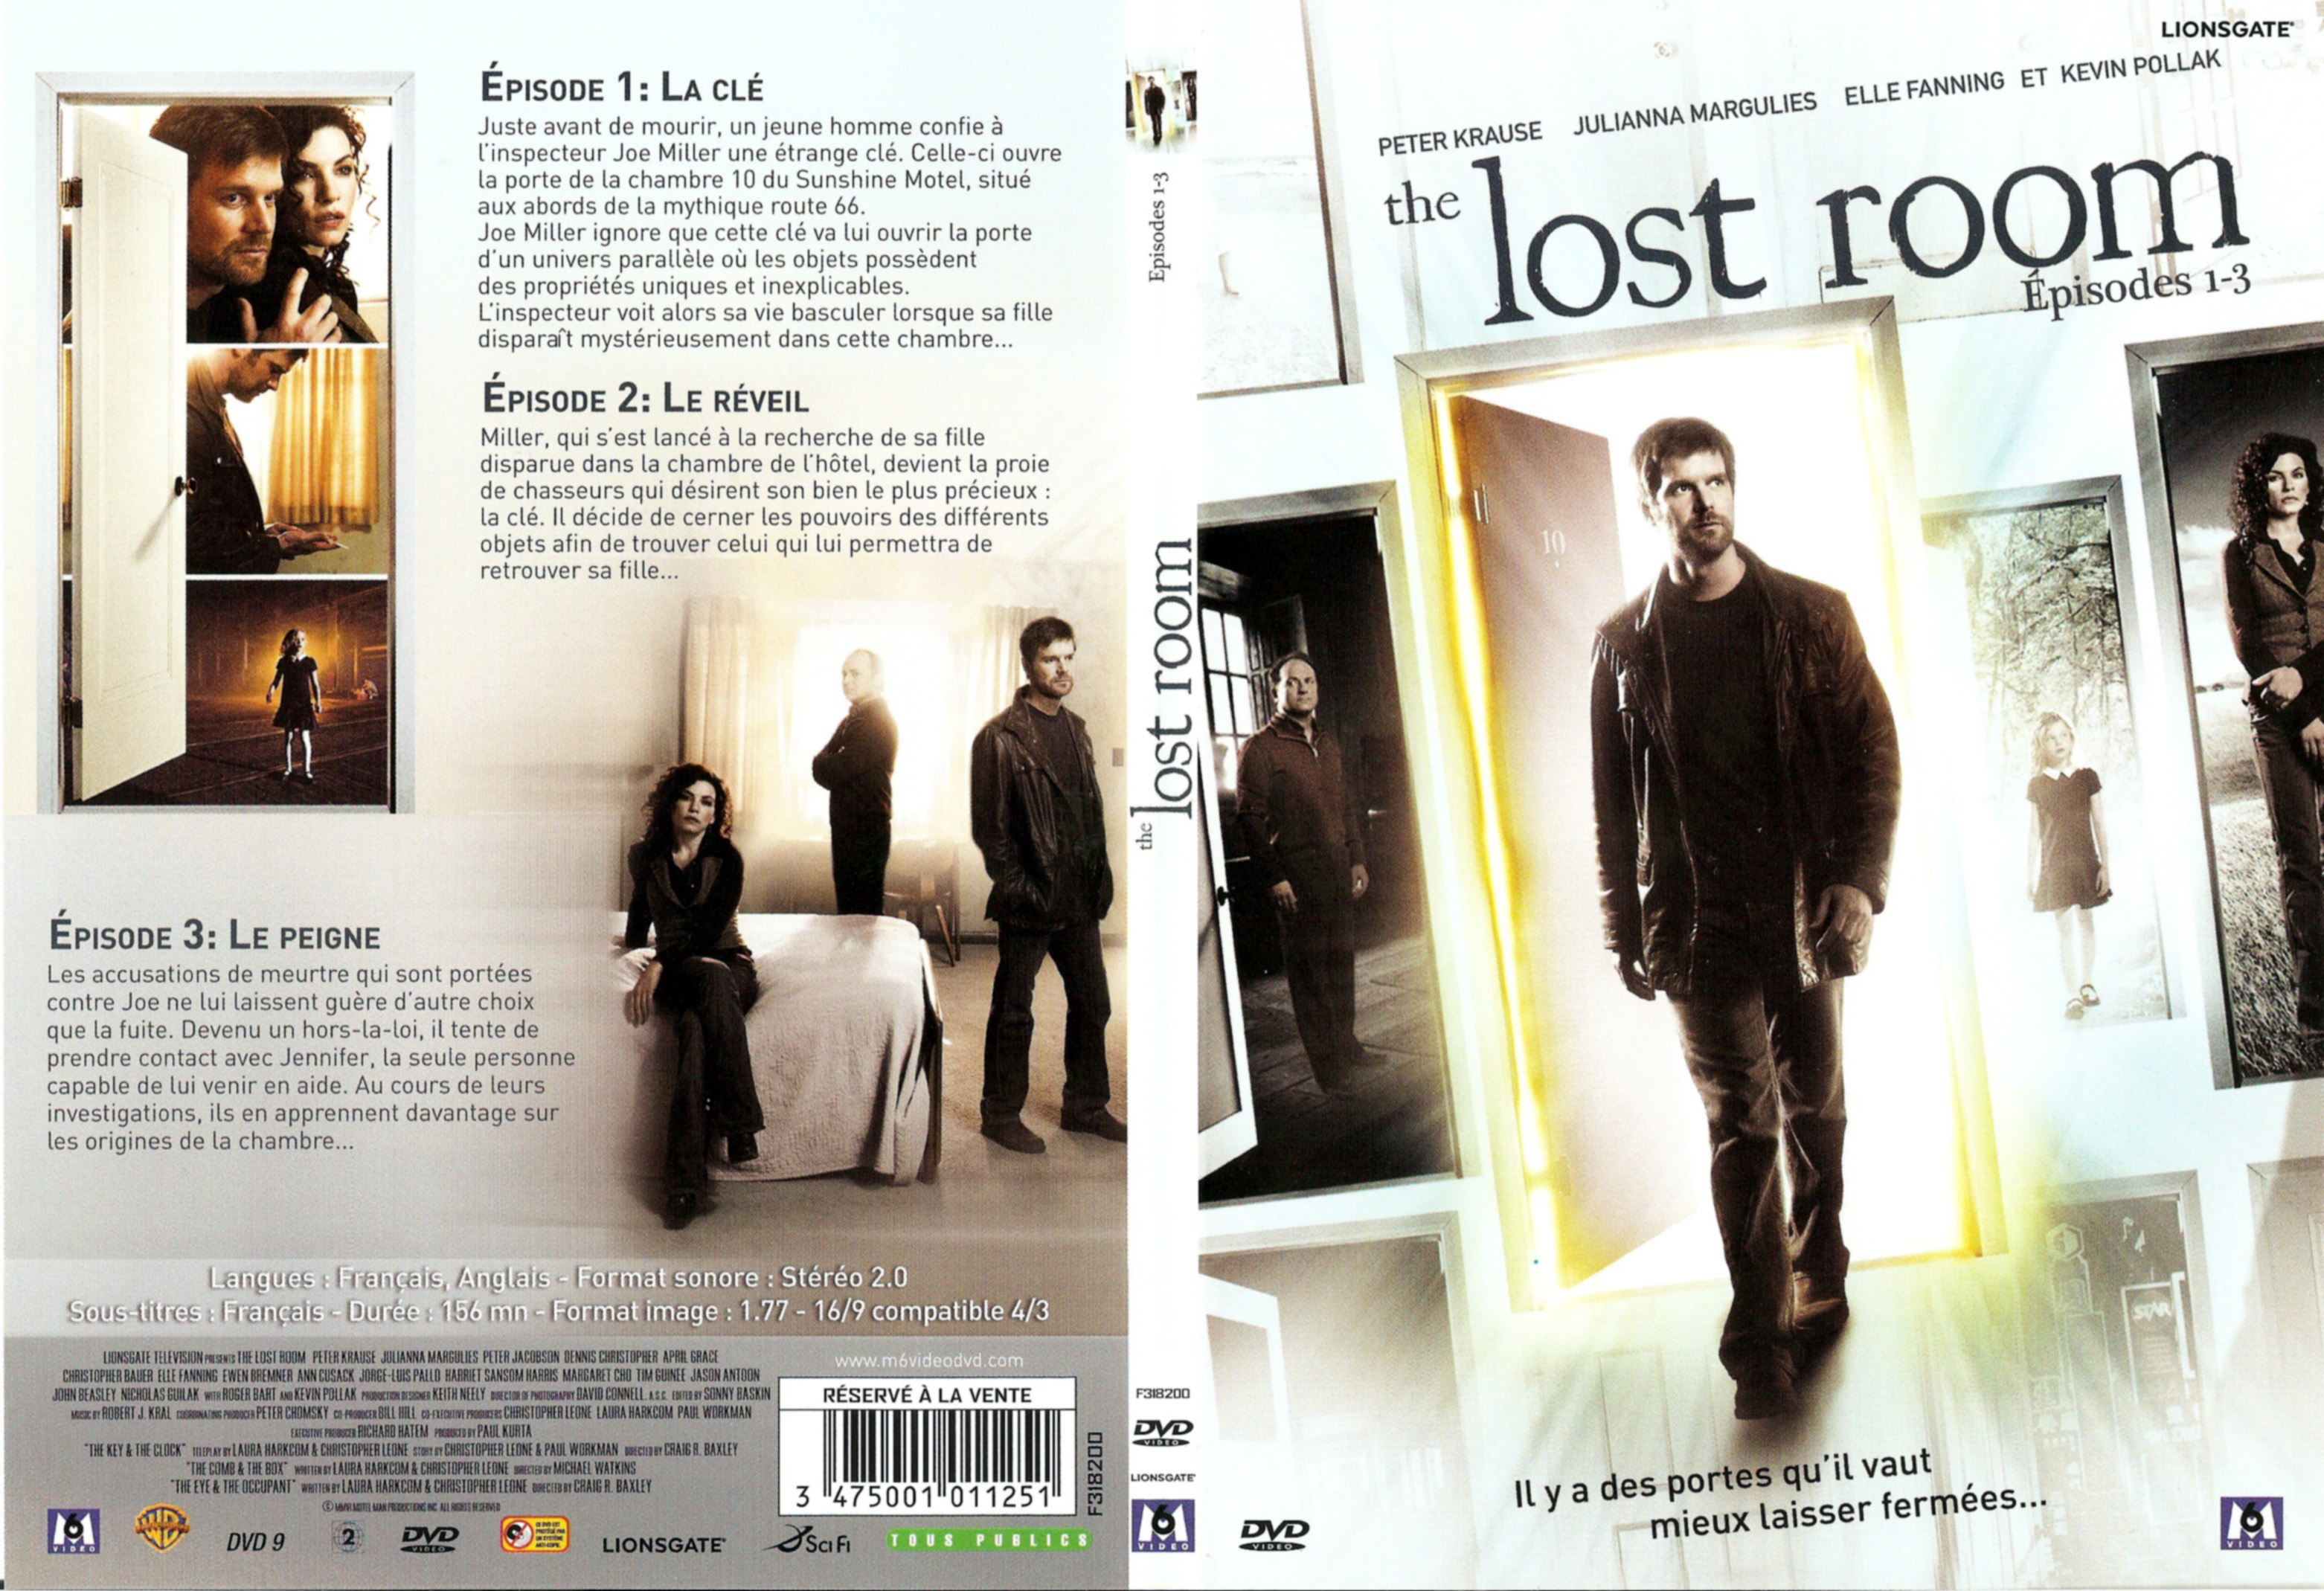 Jaquette DVD The lost room DVD 1